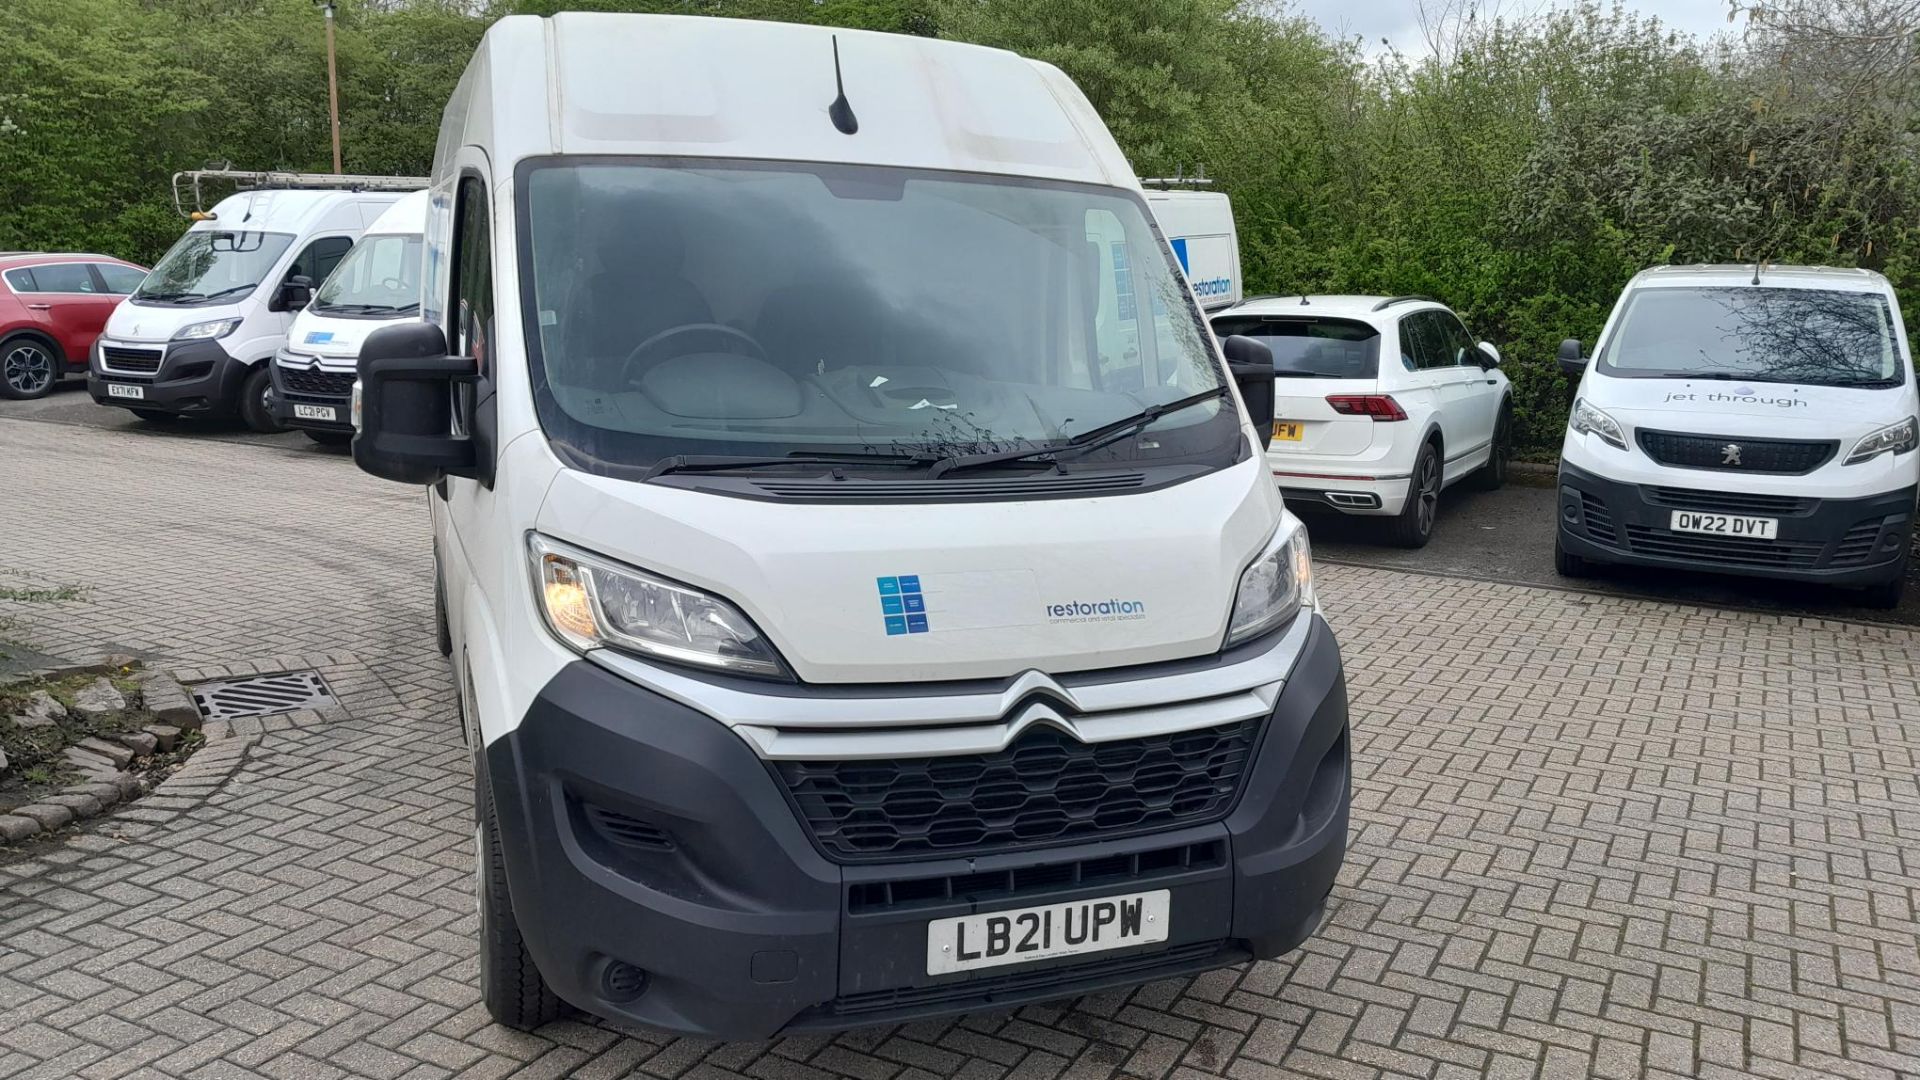 Citroen Relay SWB Van (Registration Number LB21 UPW) – 78.029 miles recorded. Good condition - Image 2 of 9